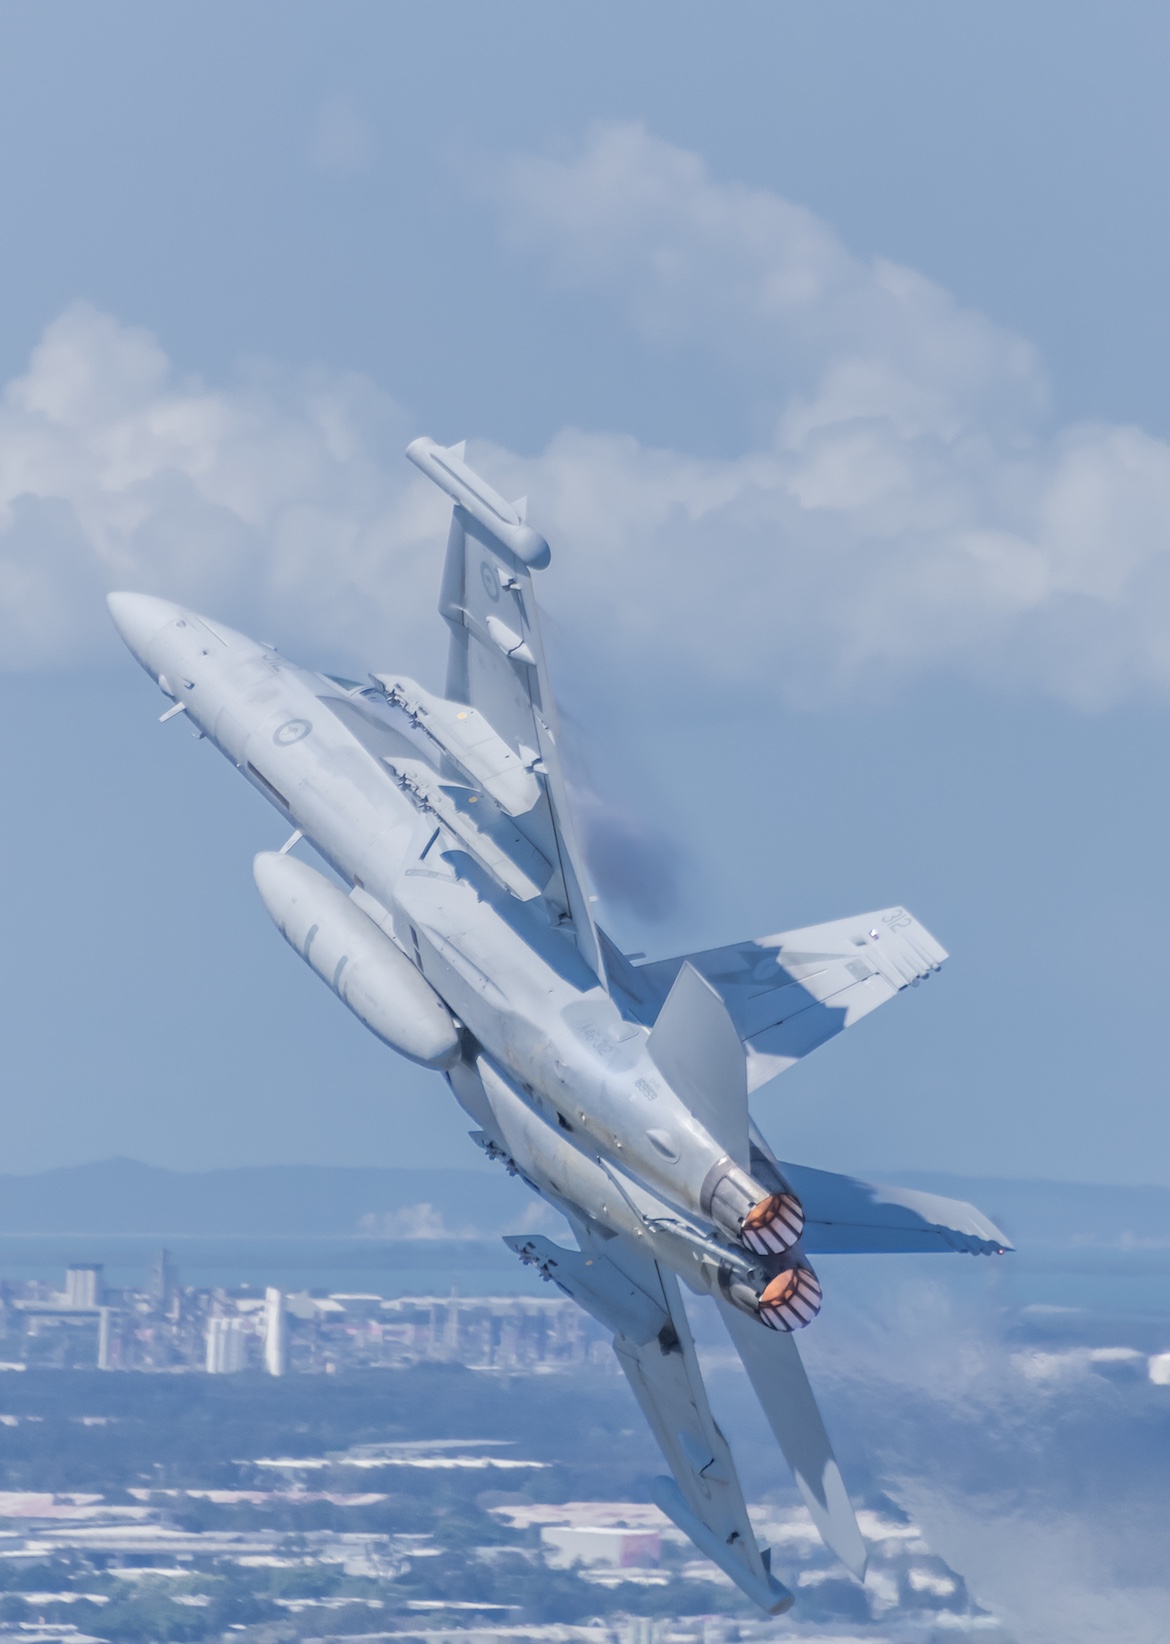 Showing off: an EA-18G, minus its jamming pods, on display over Brisbane and presenting a clear view of its underwing, external stores stations. (Mark Greenmantle)